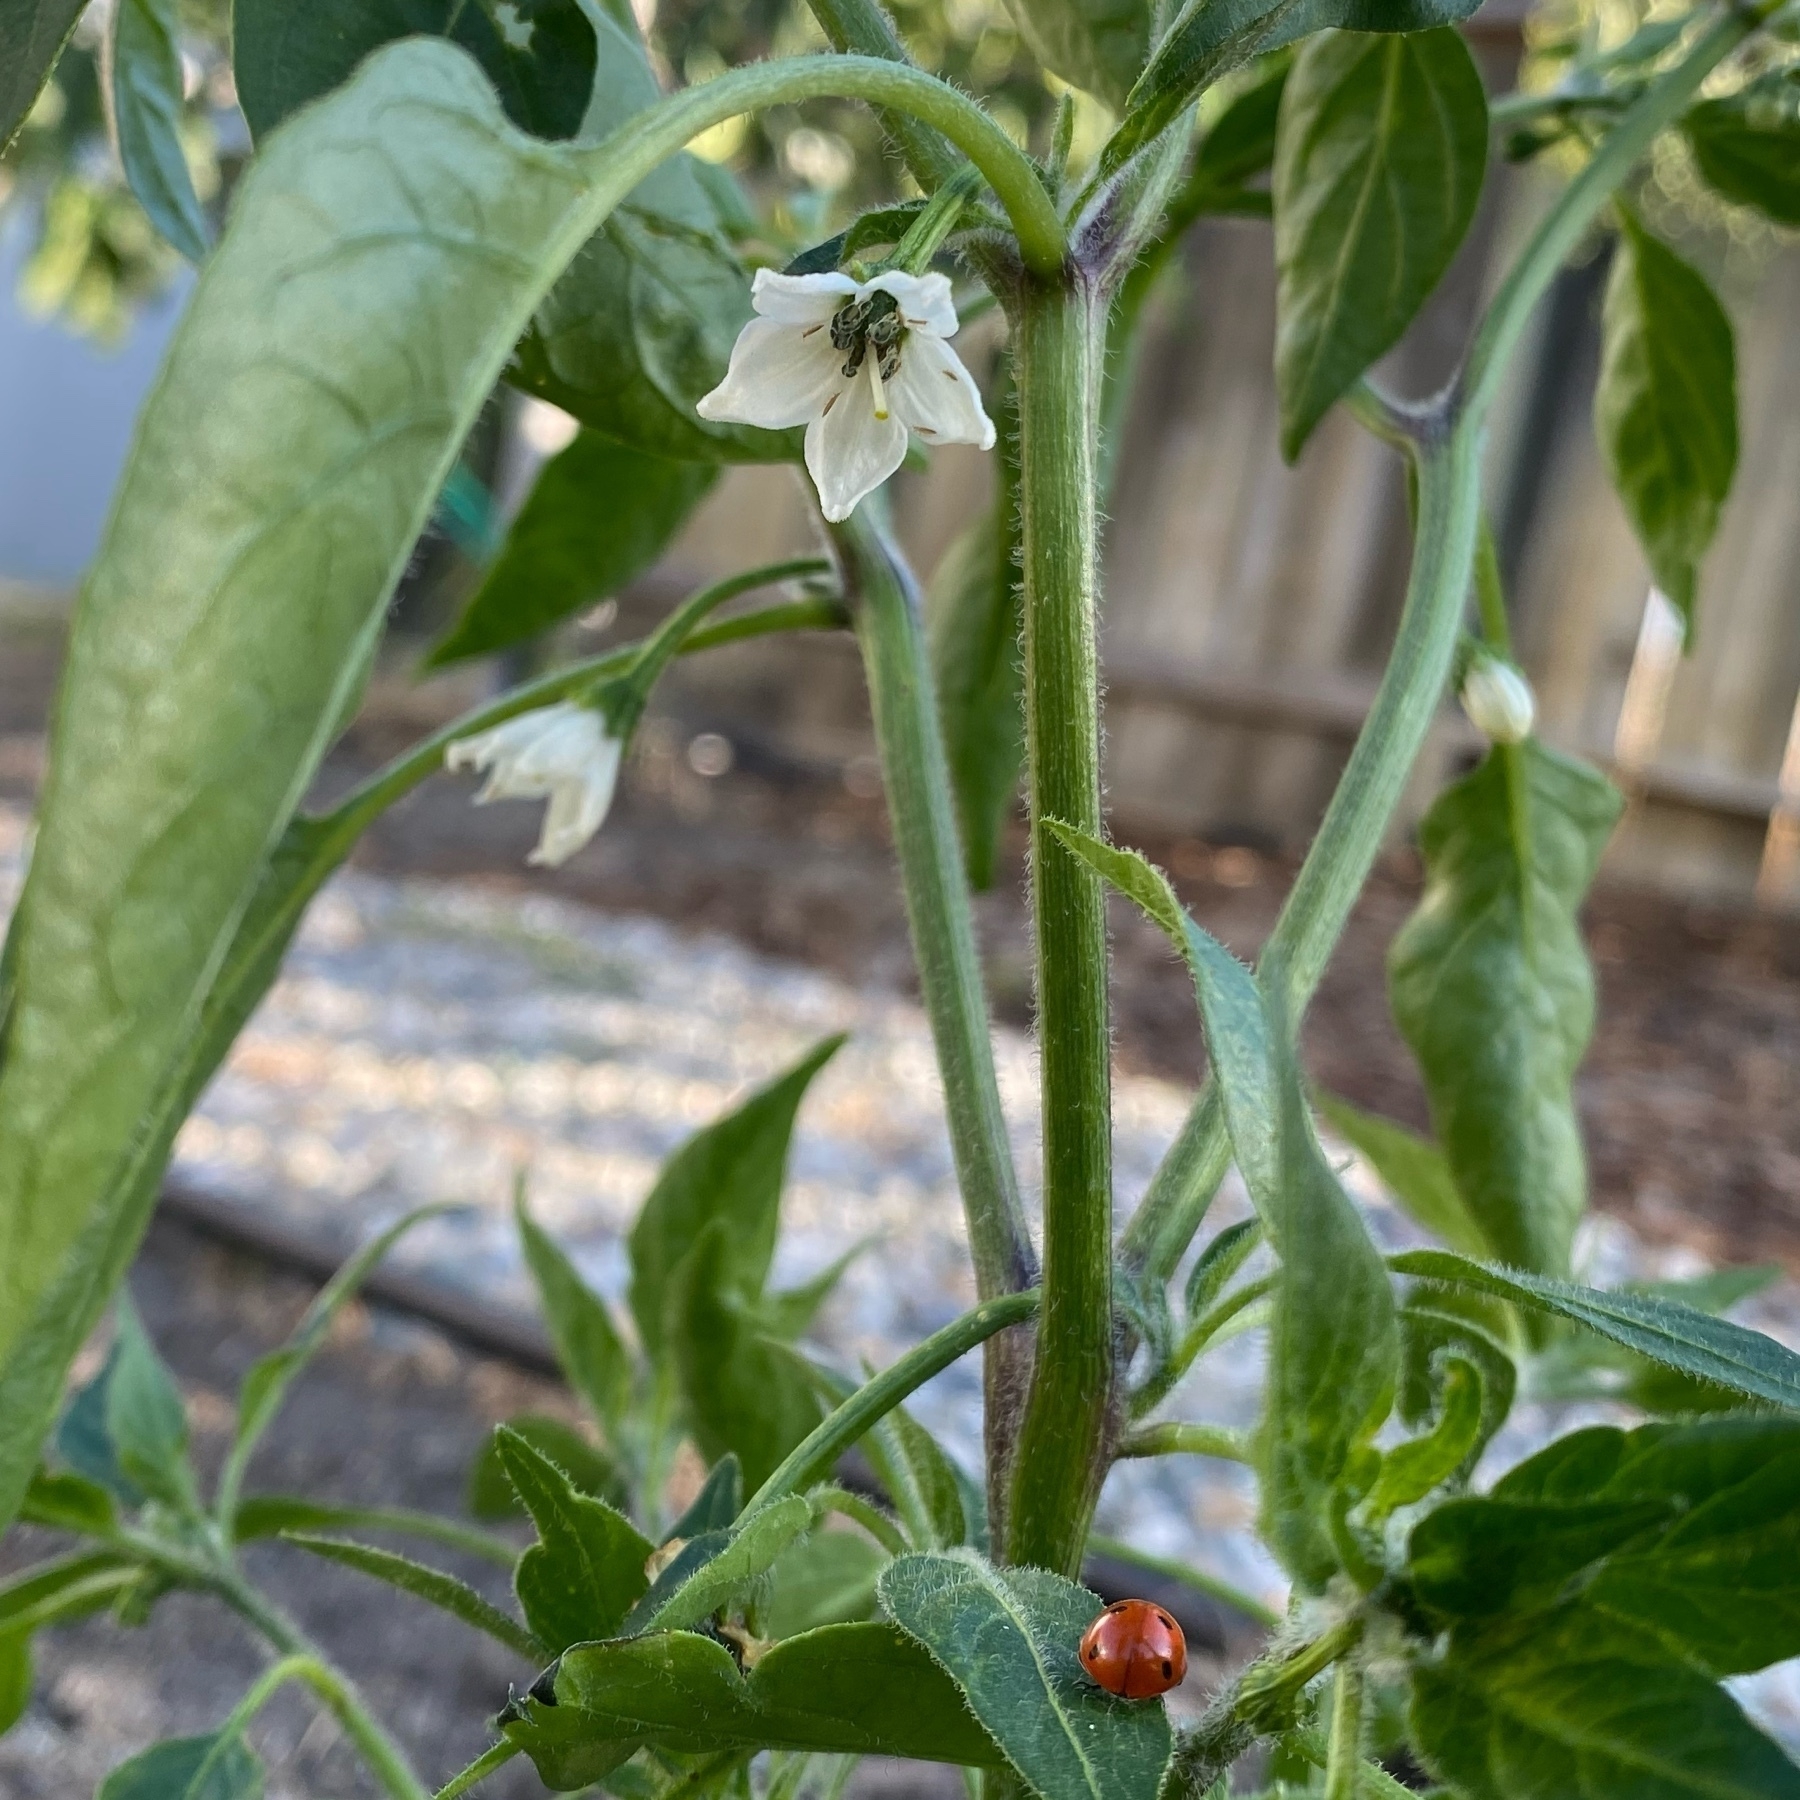 white serrano pepper flowers and a deep red ladybug on a leaf